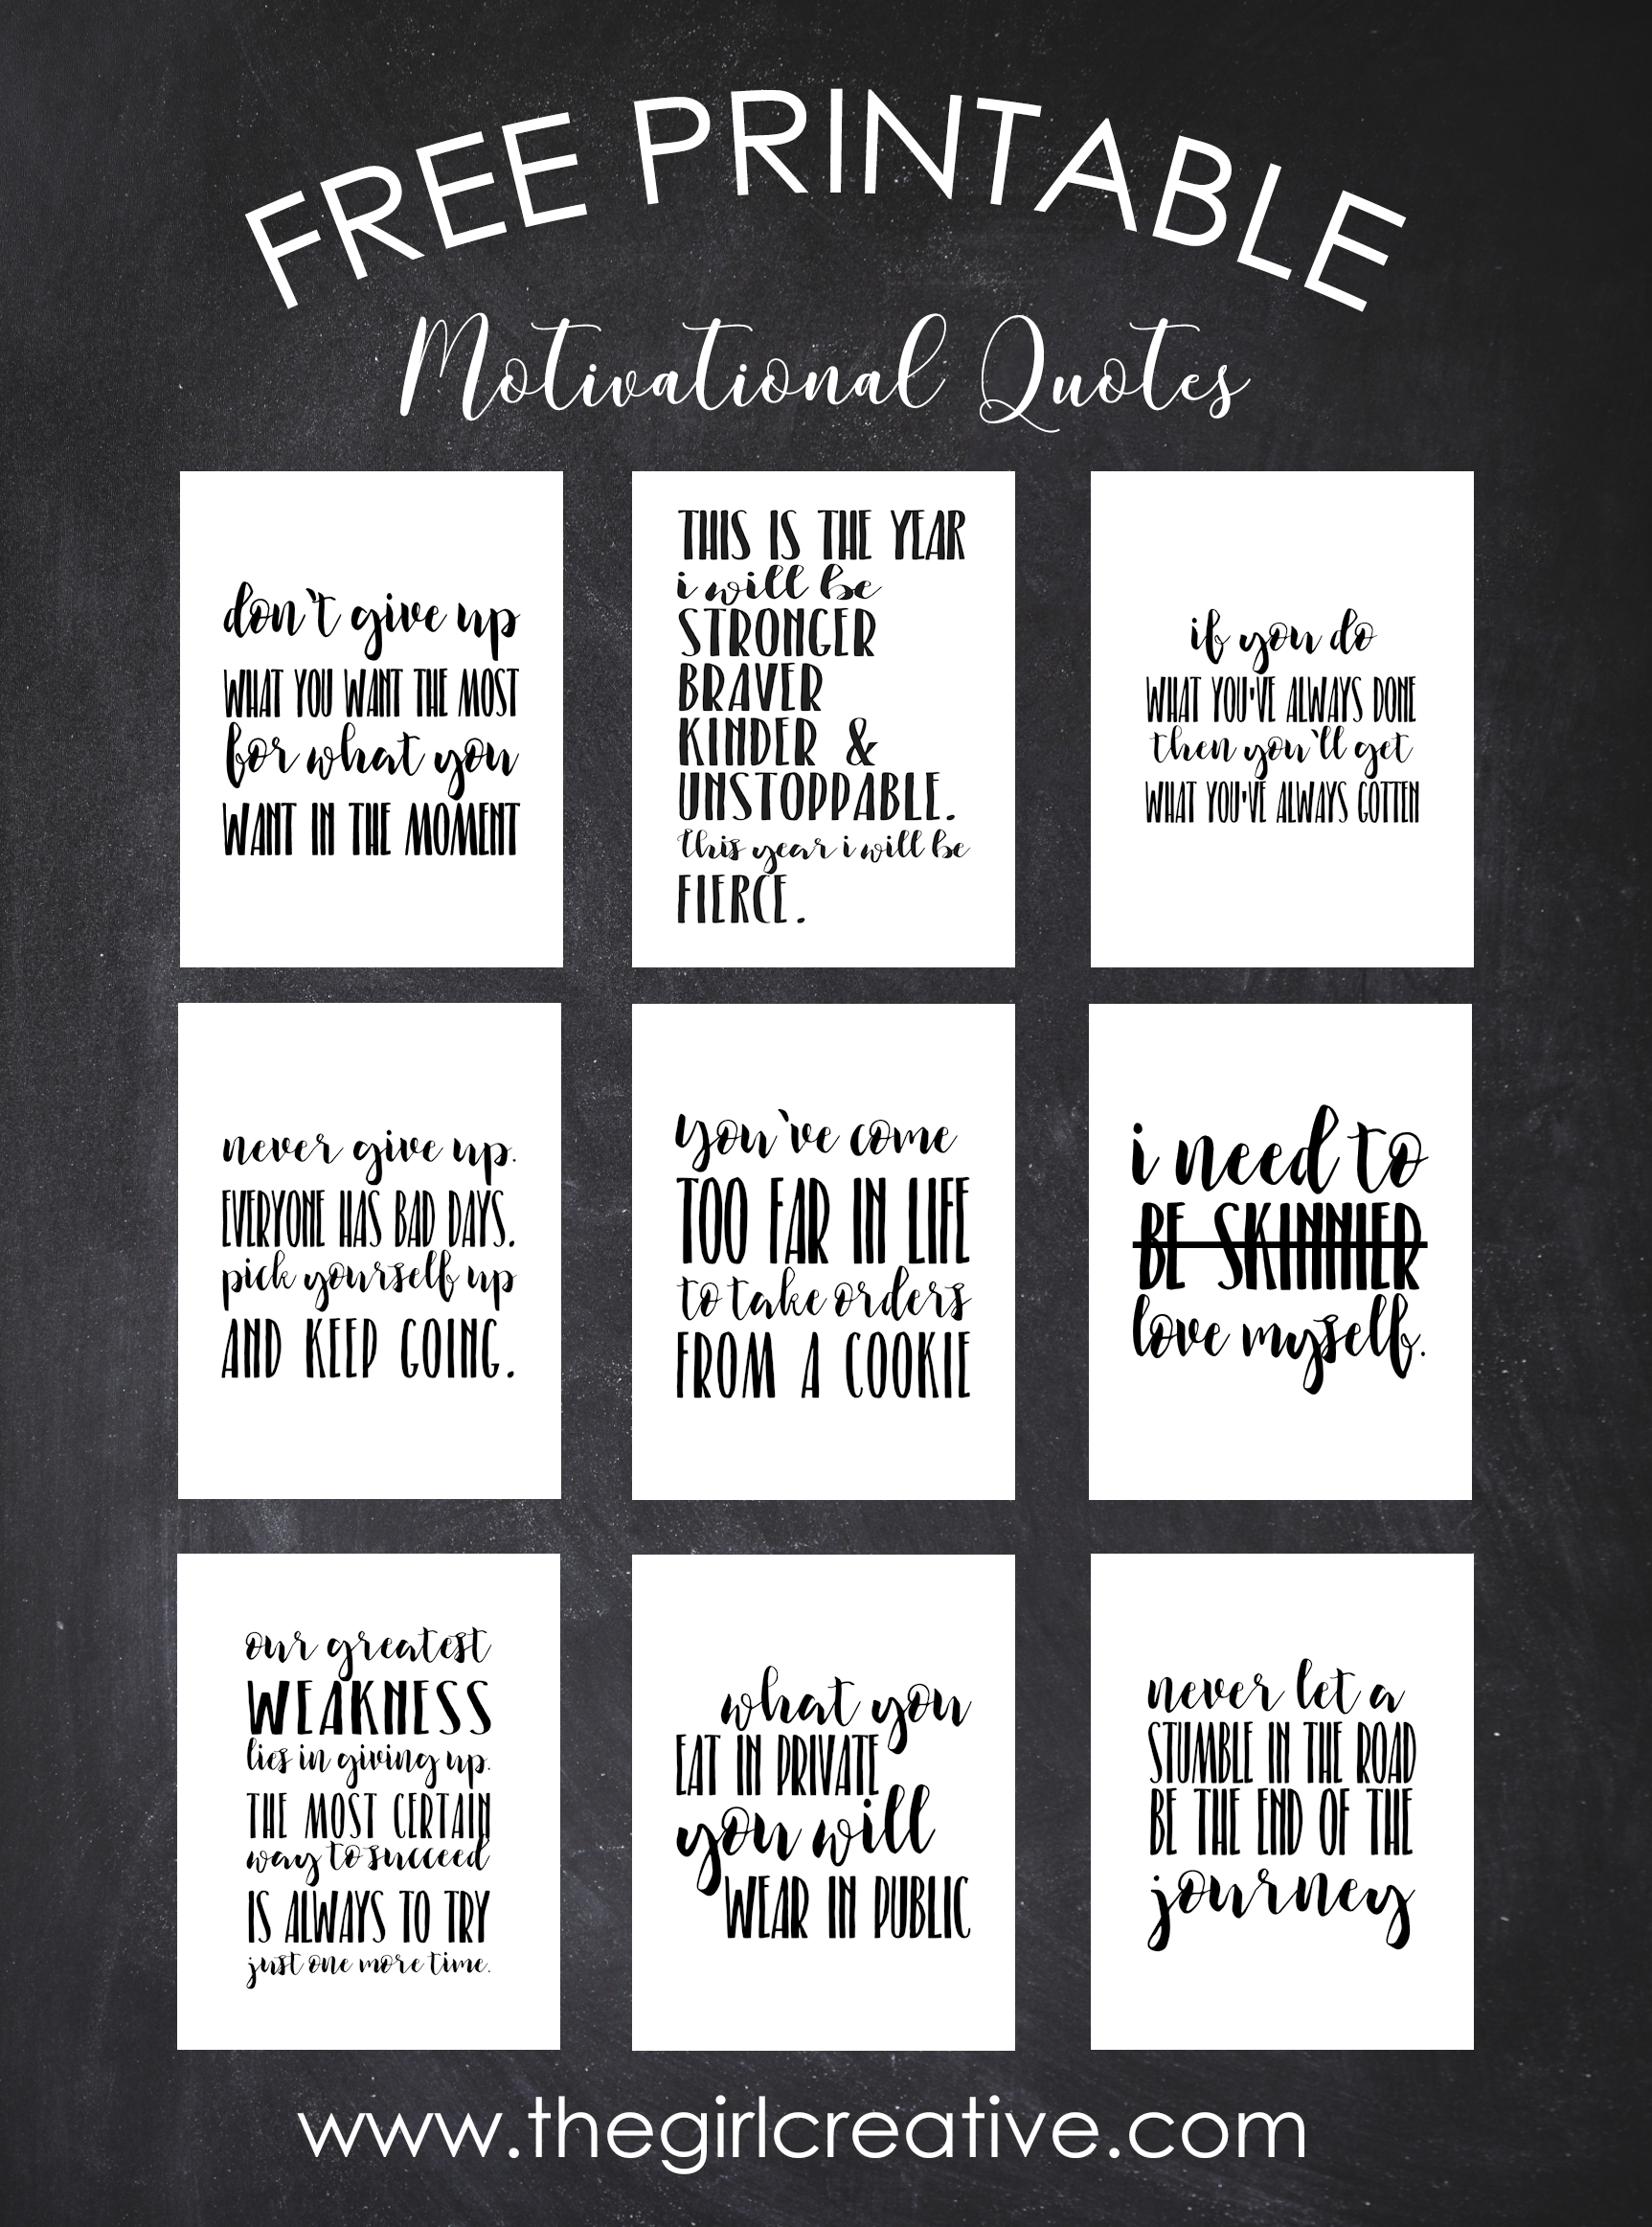 Free Printable Motivational Quotes - The Girl Creative - Free Printable Inspirational Quotes